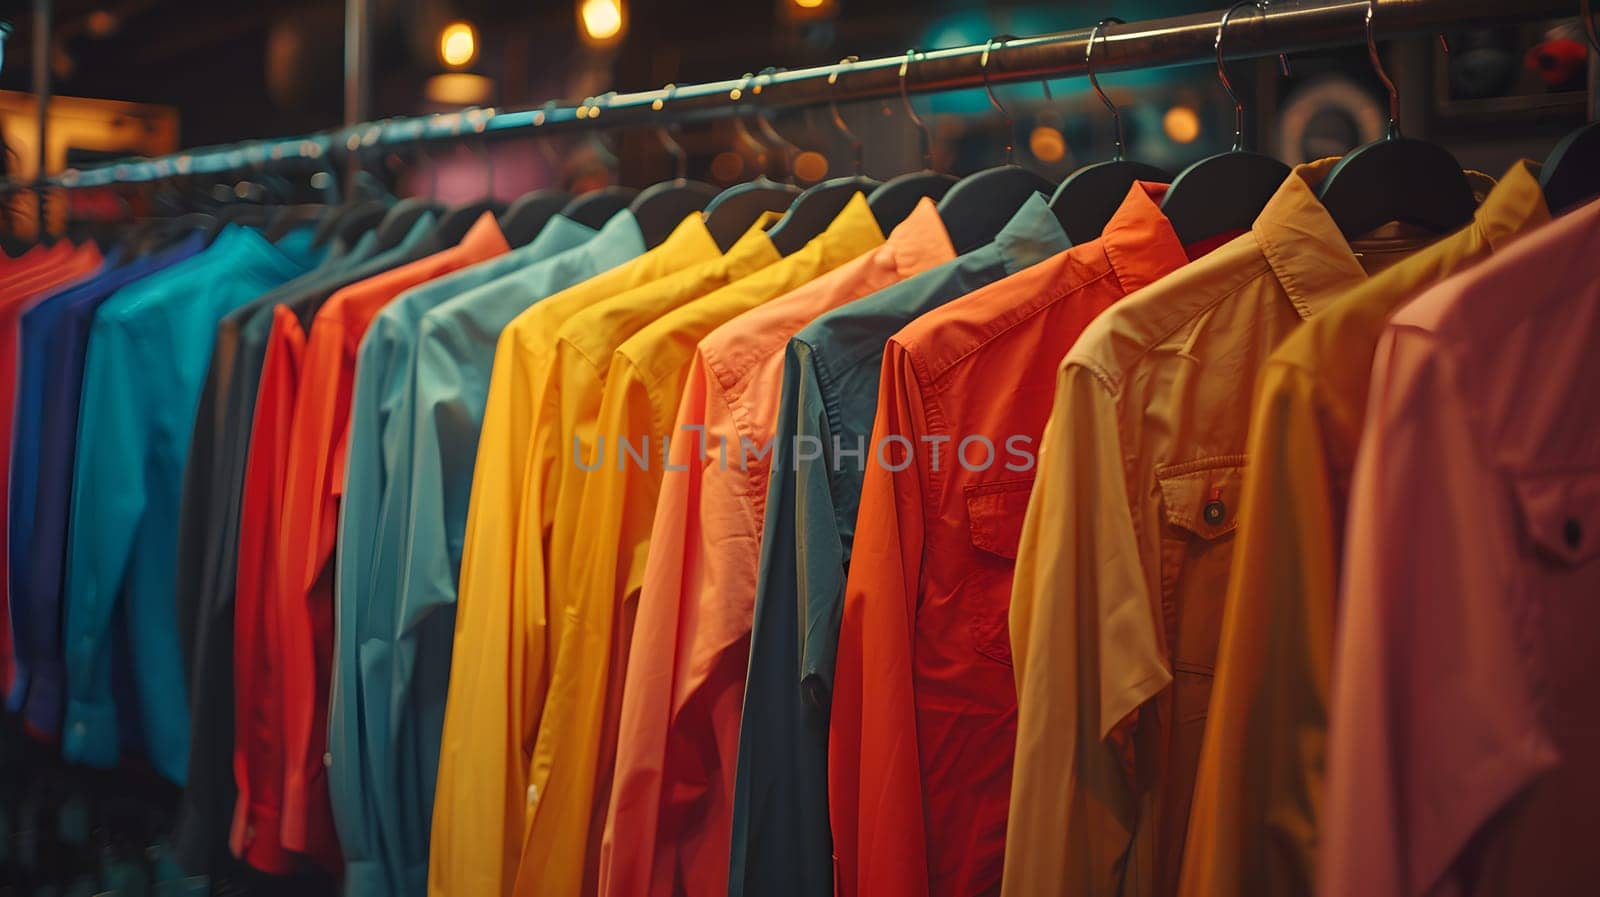 A display of vibrant outerwear including tshirts, sportswear, and jerseys on clothes hangers in a retail store in the city market, showcasing fashion design for an upcoming event